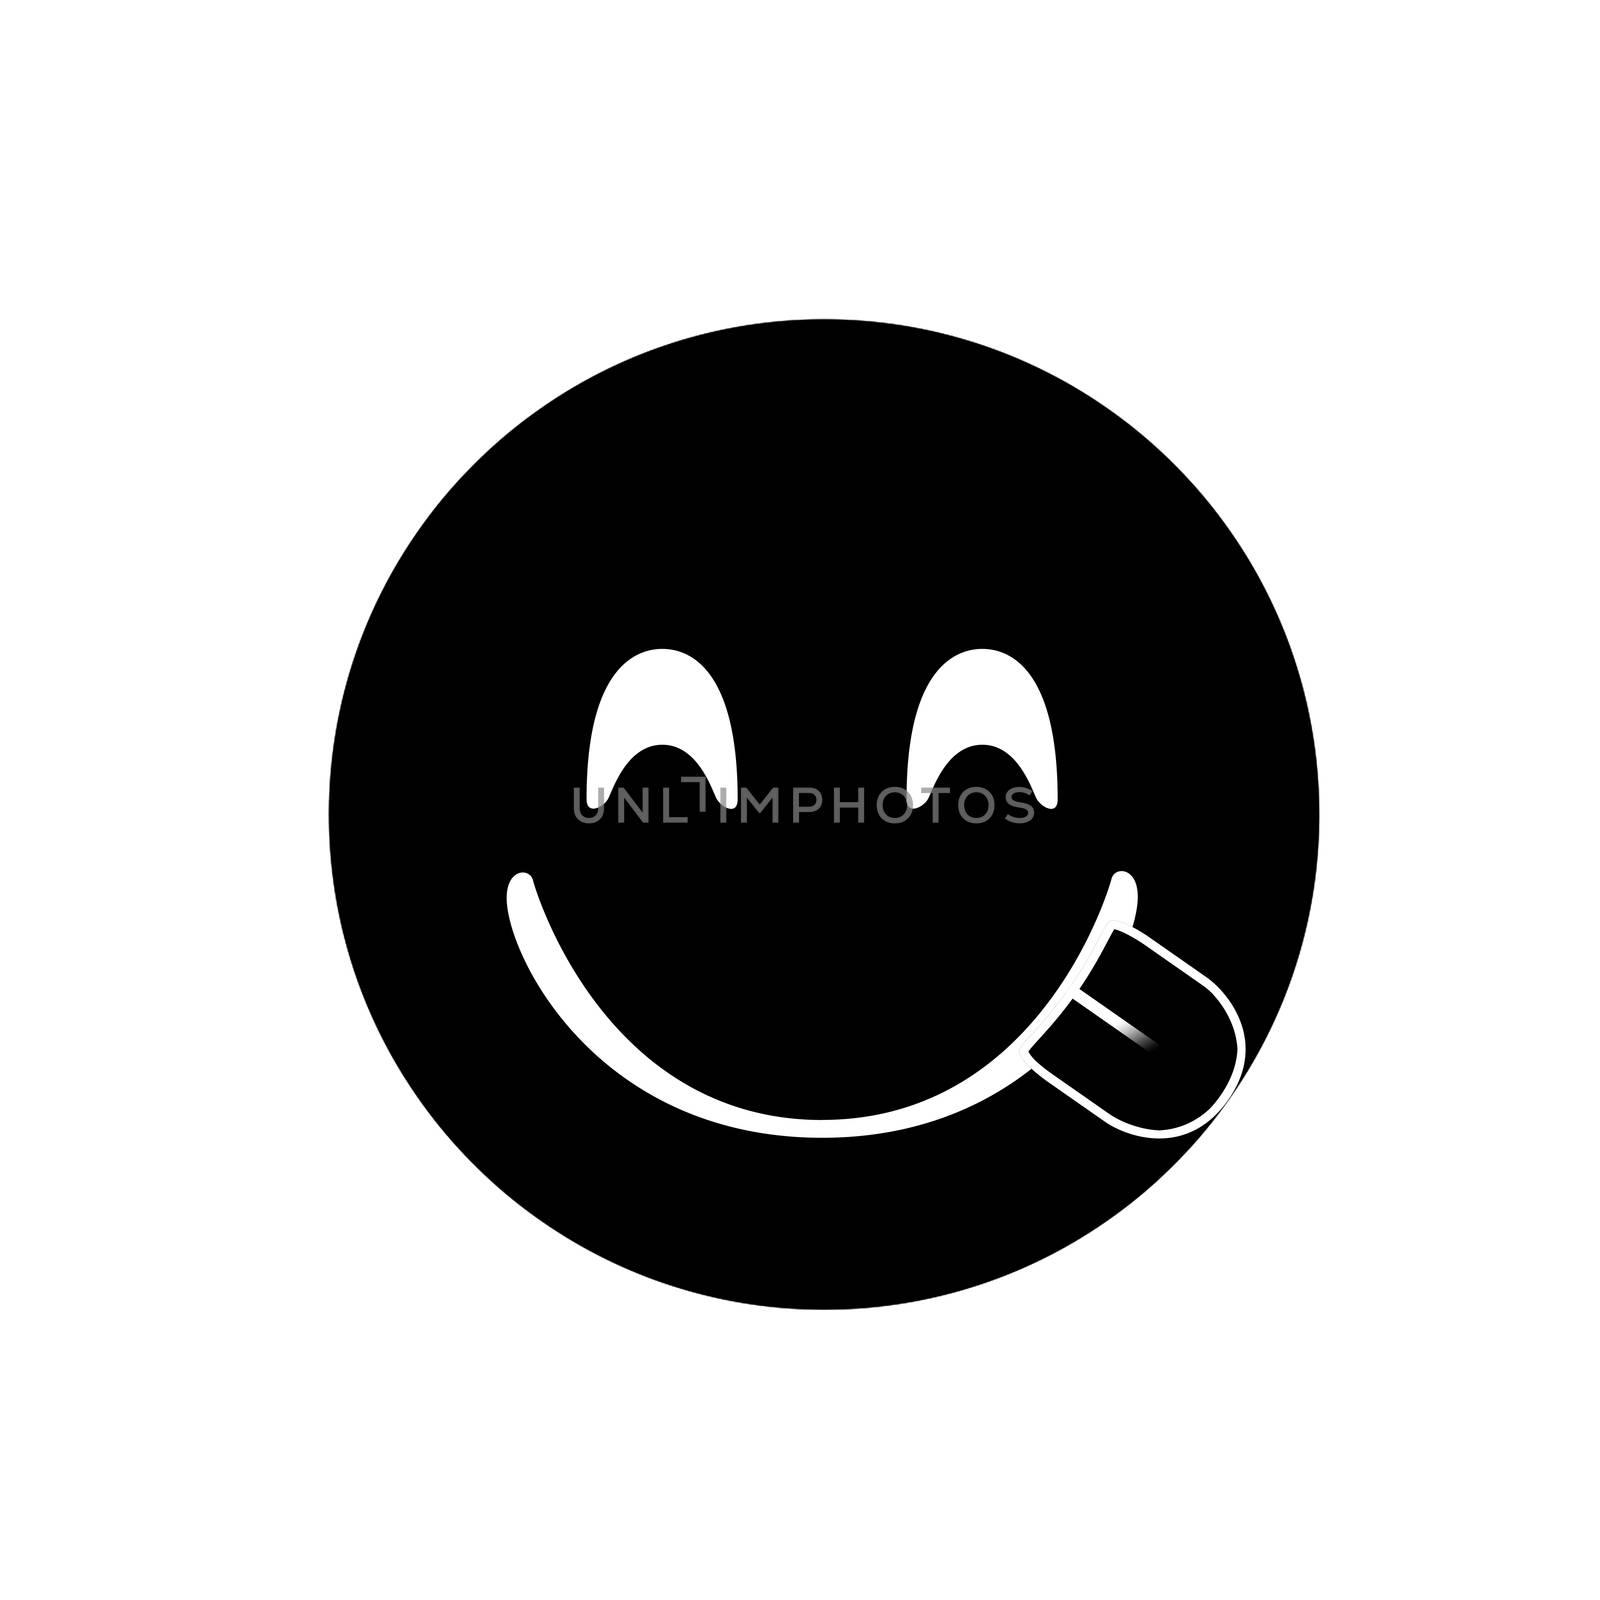 Black smiley and tasting food face with tongue out icon by cougarsan